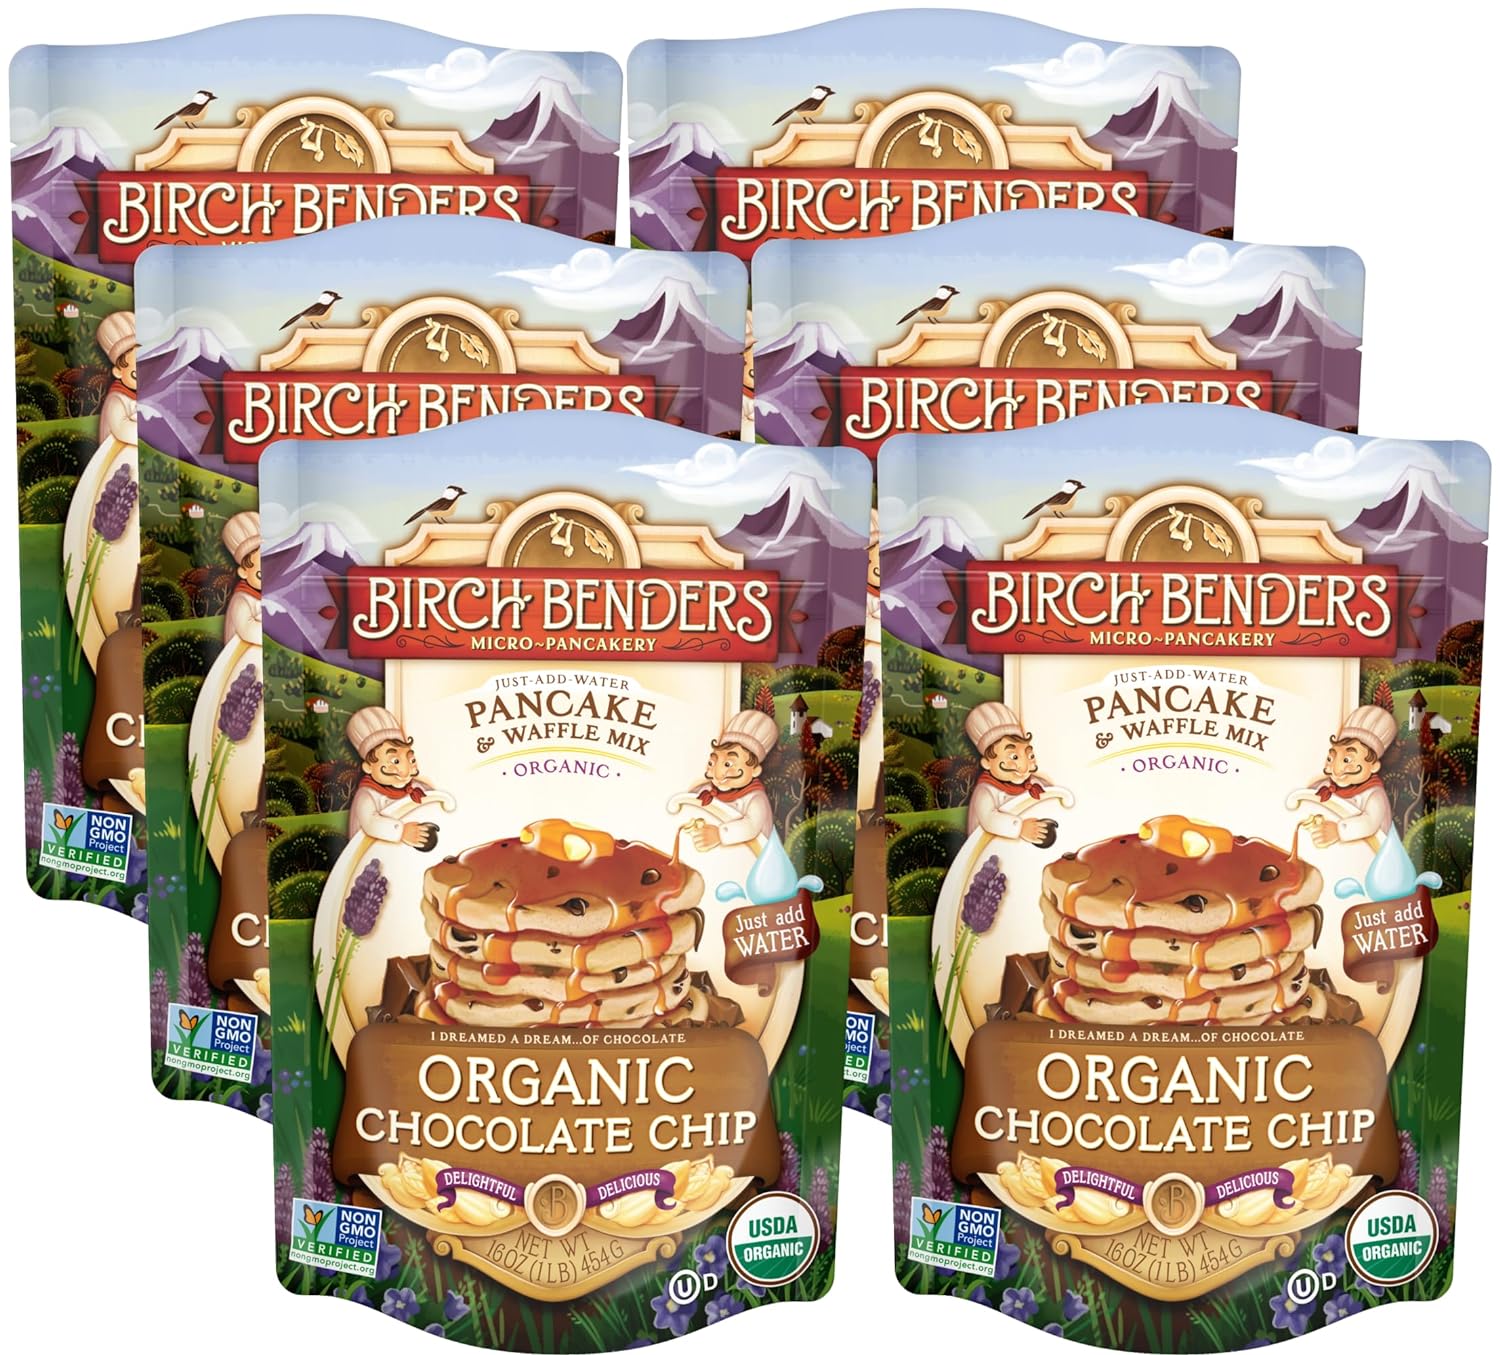 Birch Benders Organic Pancake and Waffle Mix, Chocolate Chip, 16 Oz (Pack of 6)